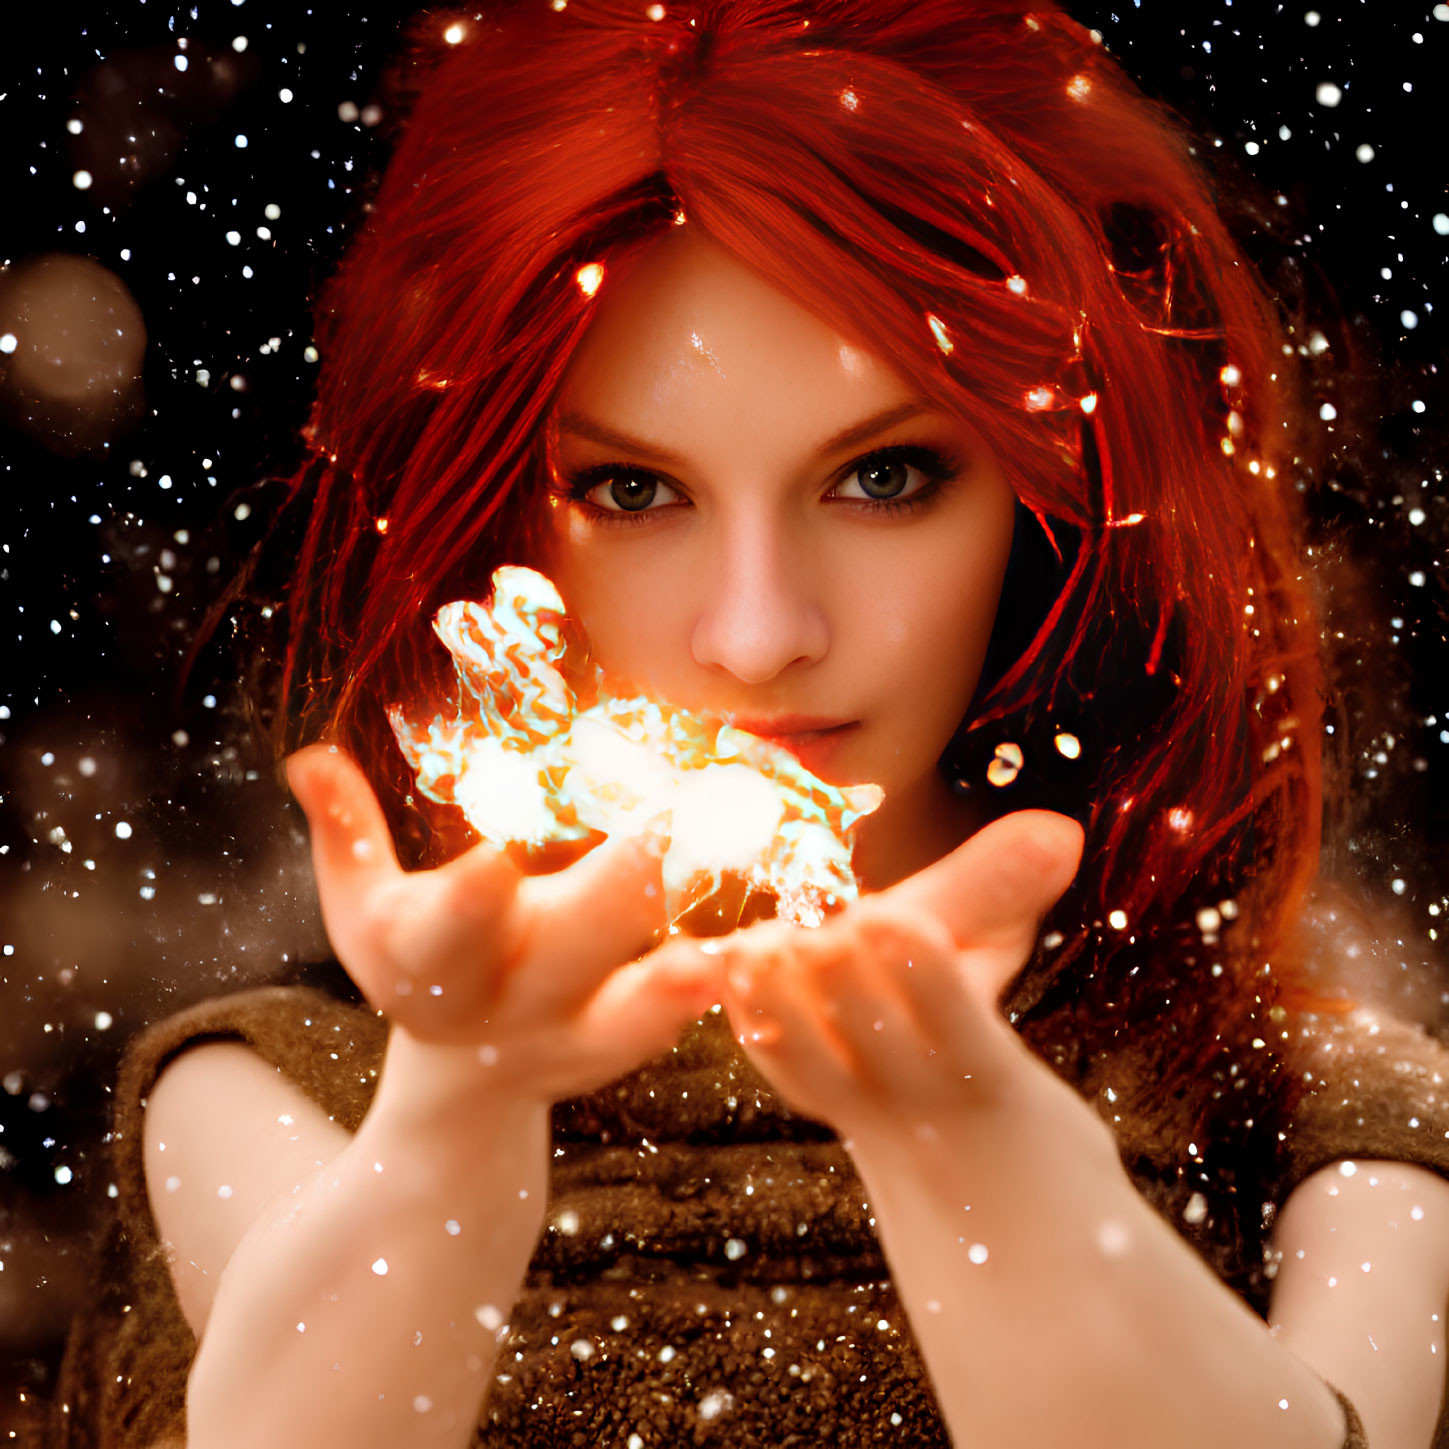 Vivid red-haired woman with blue eyes holding fiery orb in mystical setting